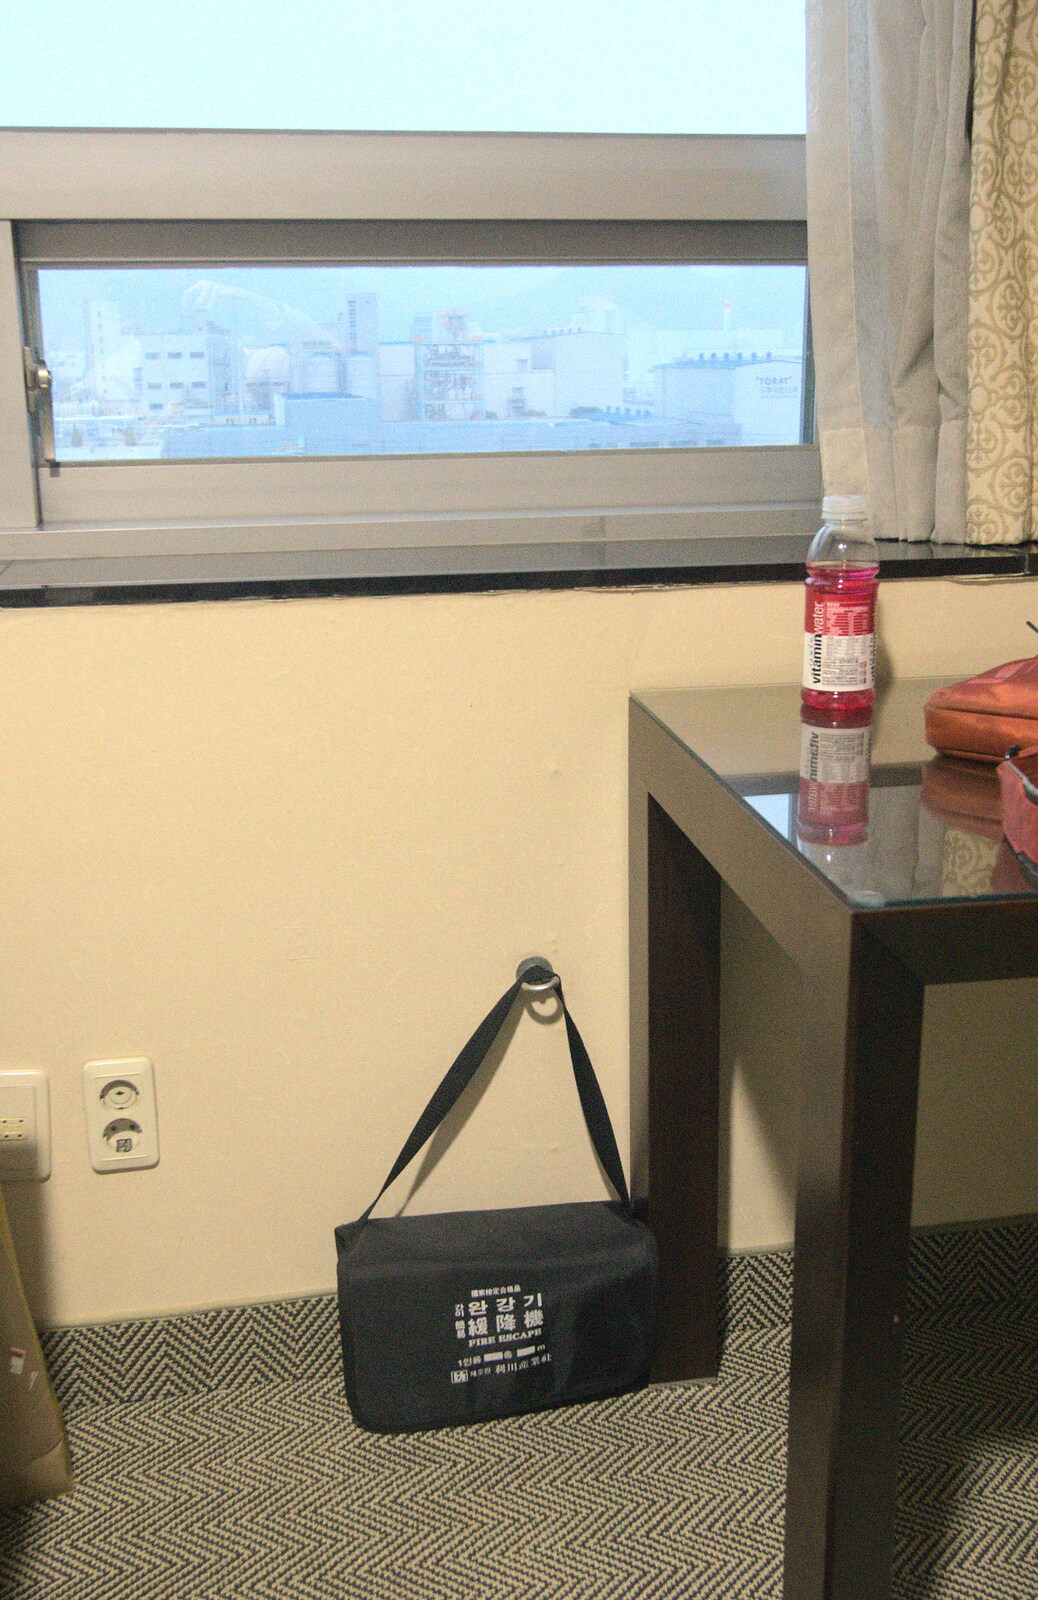 The bag contains a fire escape, on the eight floor from Seomun Market, Daegu, South Korea - 1st July 2012